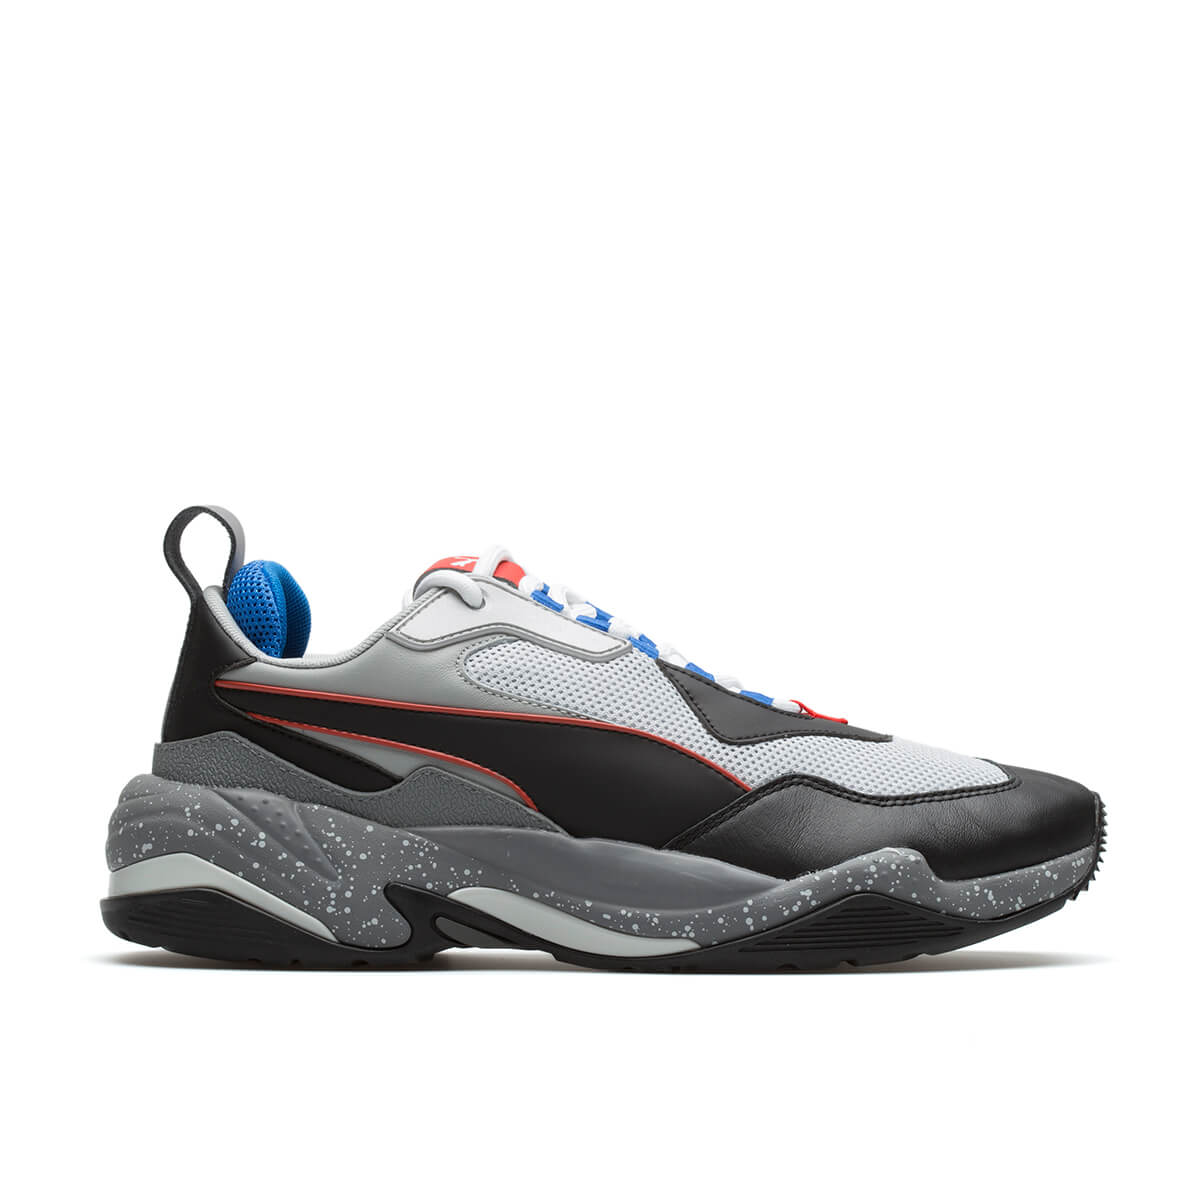 PUMA Thunder Electric sneakers